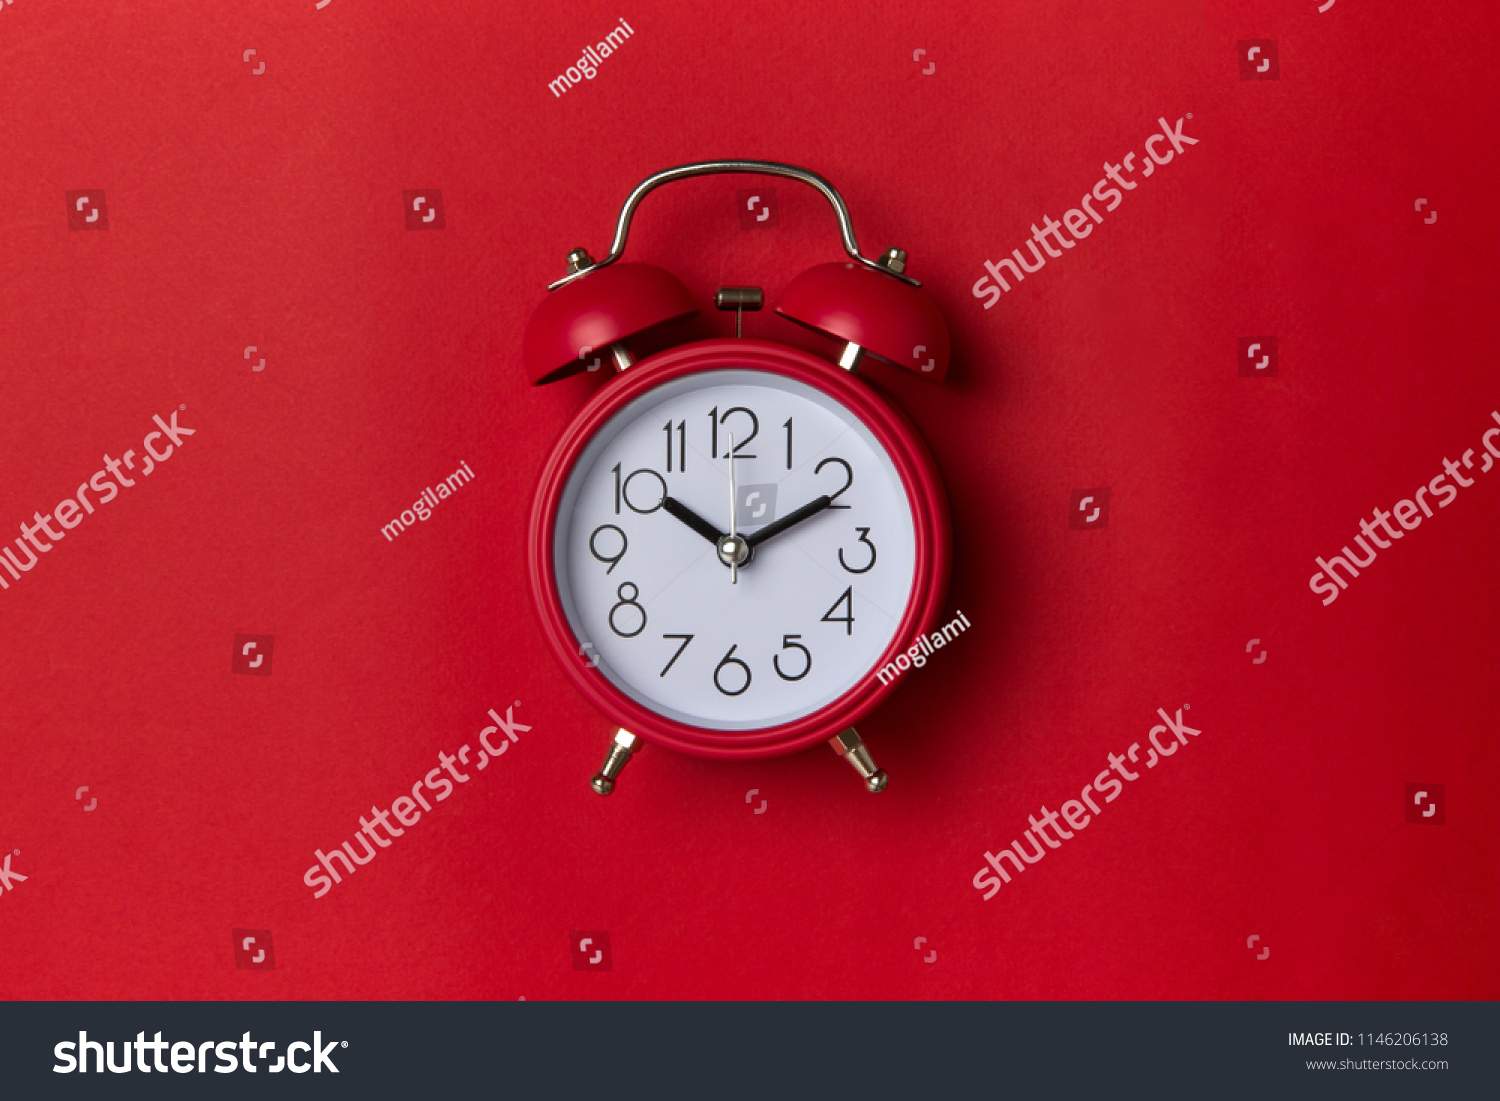 red alarm clock on red background. close up shot. top view. #1146206138